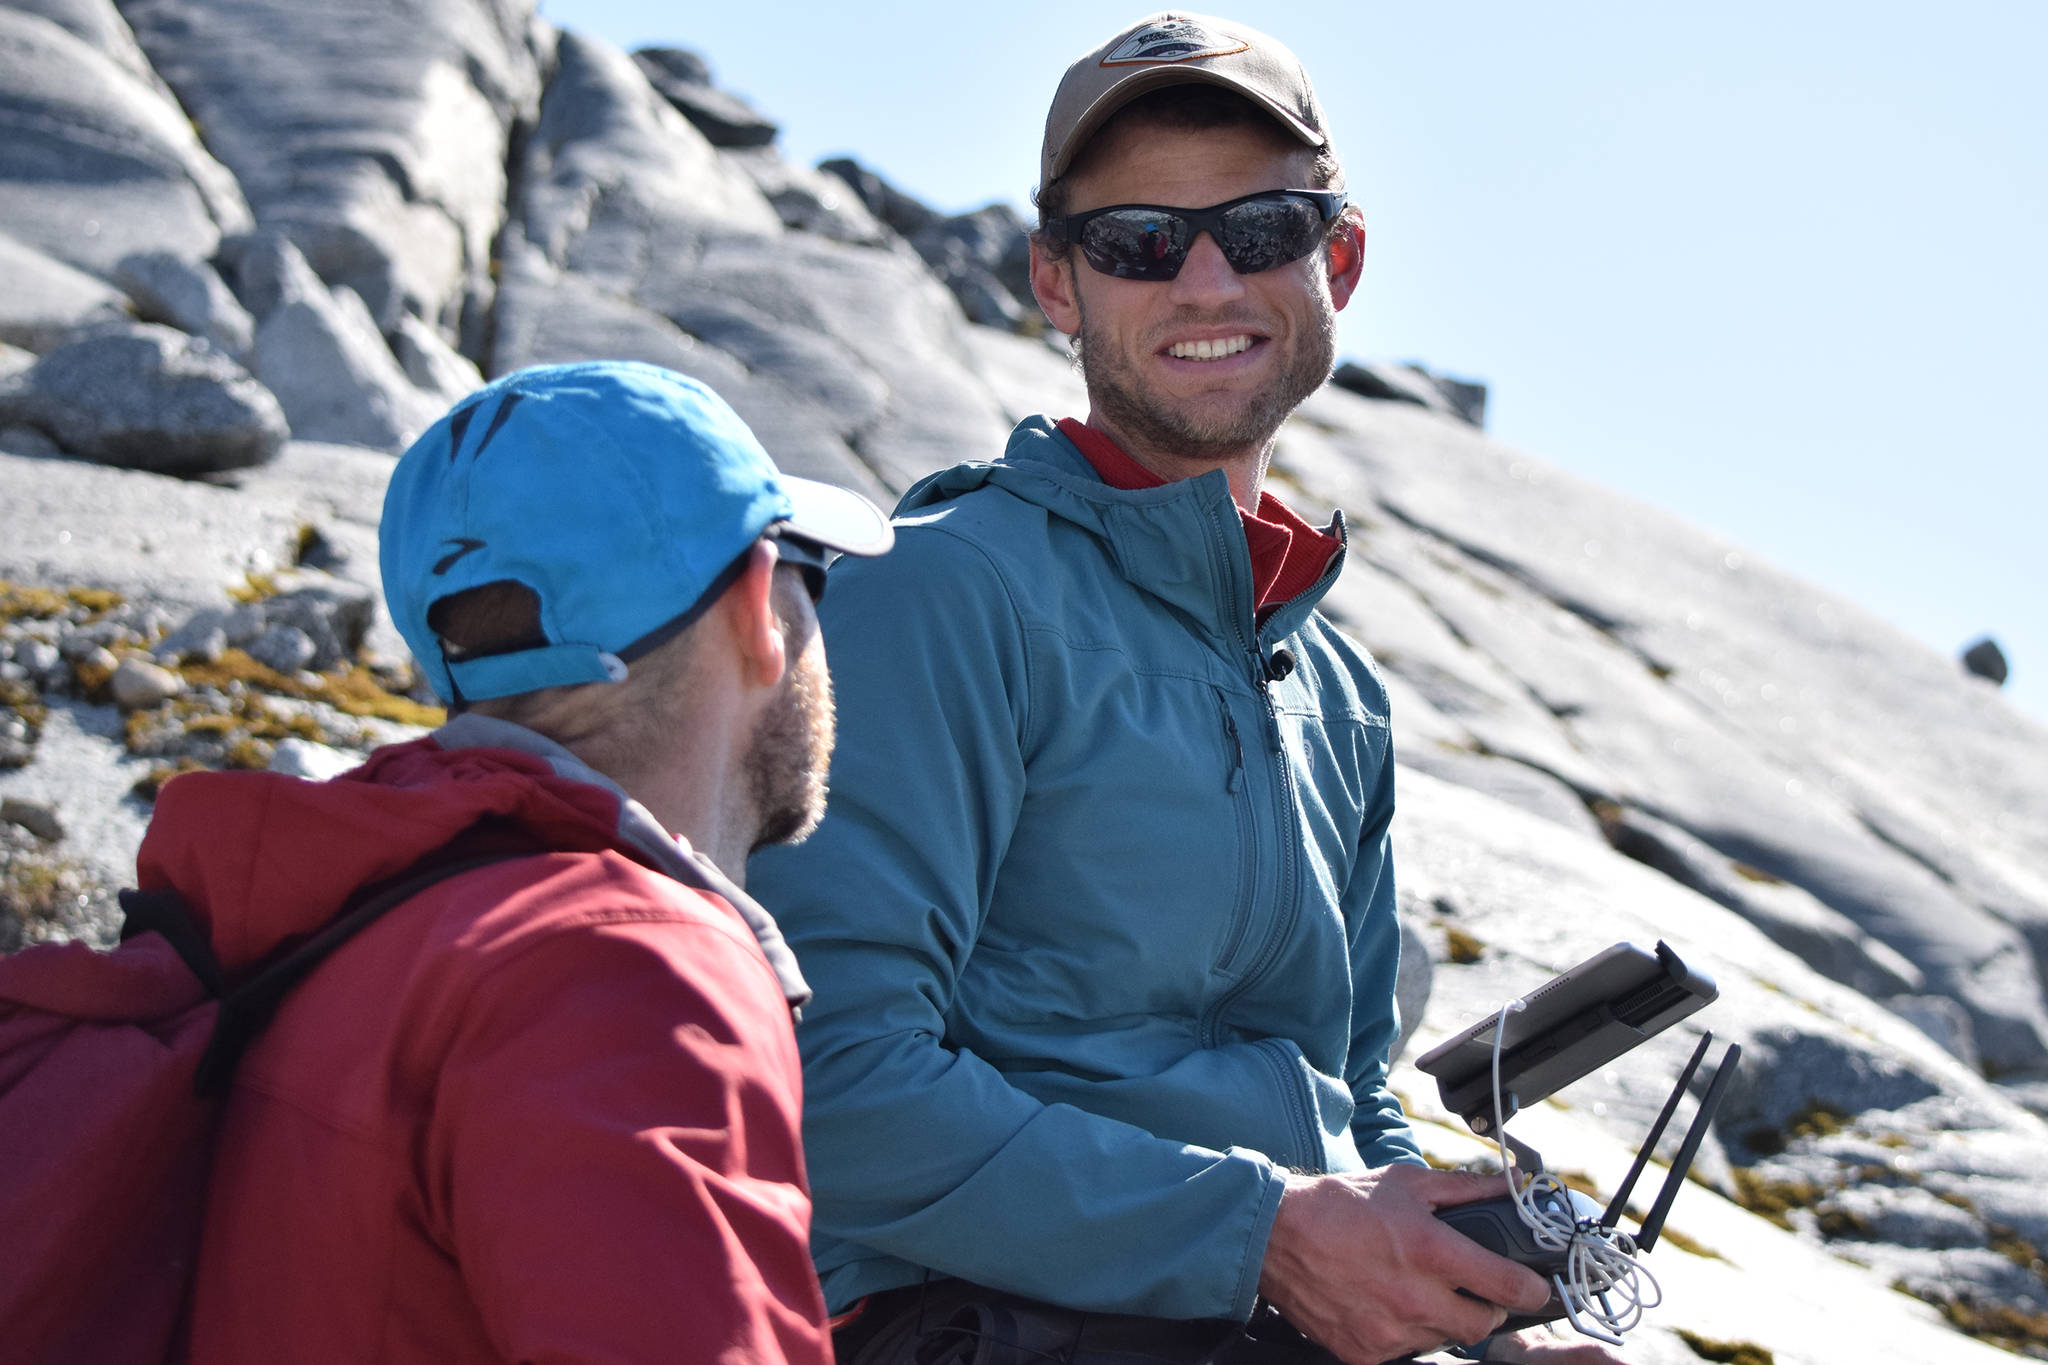 Christian Kienholz, research assistant professor of environmental science at the University of Alaska Southeast, speaks with Gabriel Wolken, research assistant professor at the University of Alaska Fairbanks, while surveying Suicide Basin using a drone on Friday, June 21, 2019. (Nolin Ainsworth | Juneau Empire)